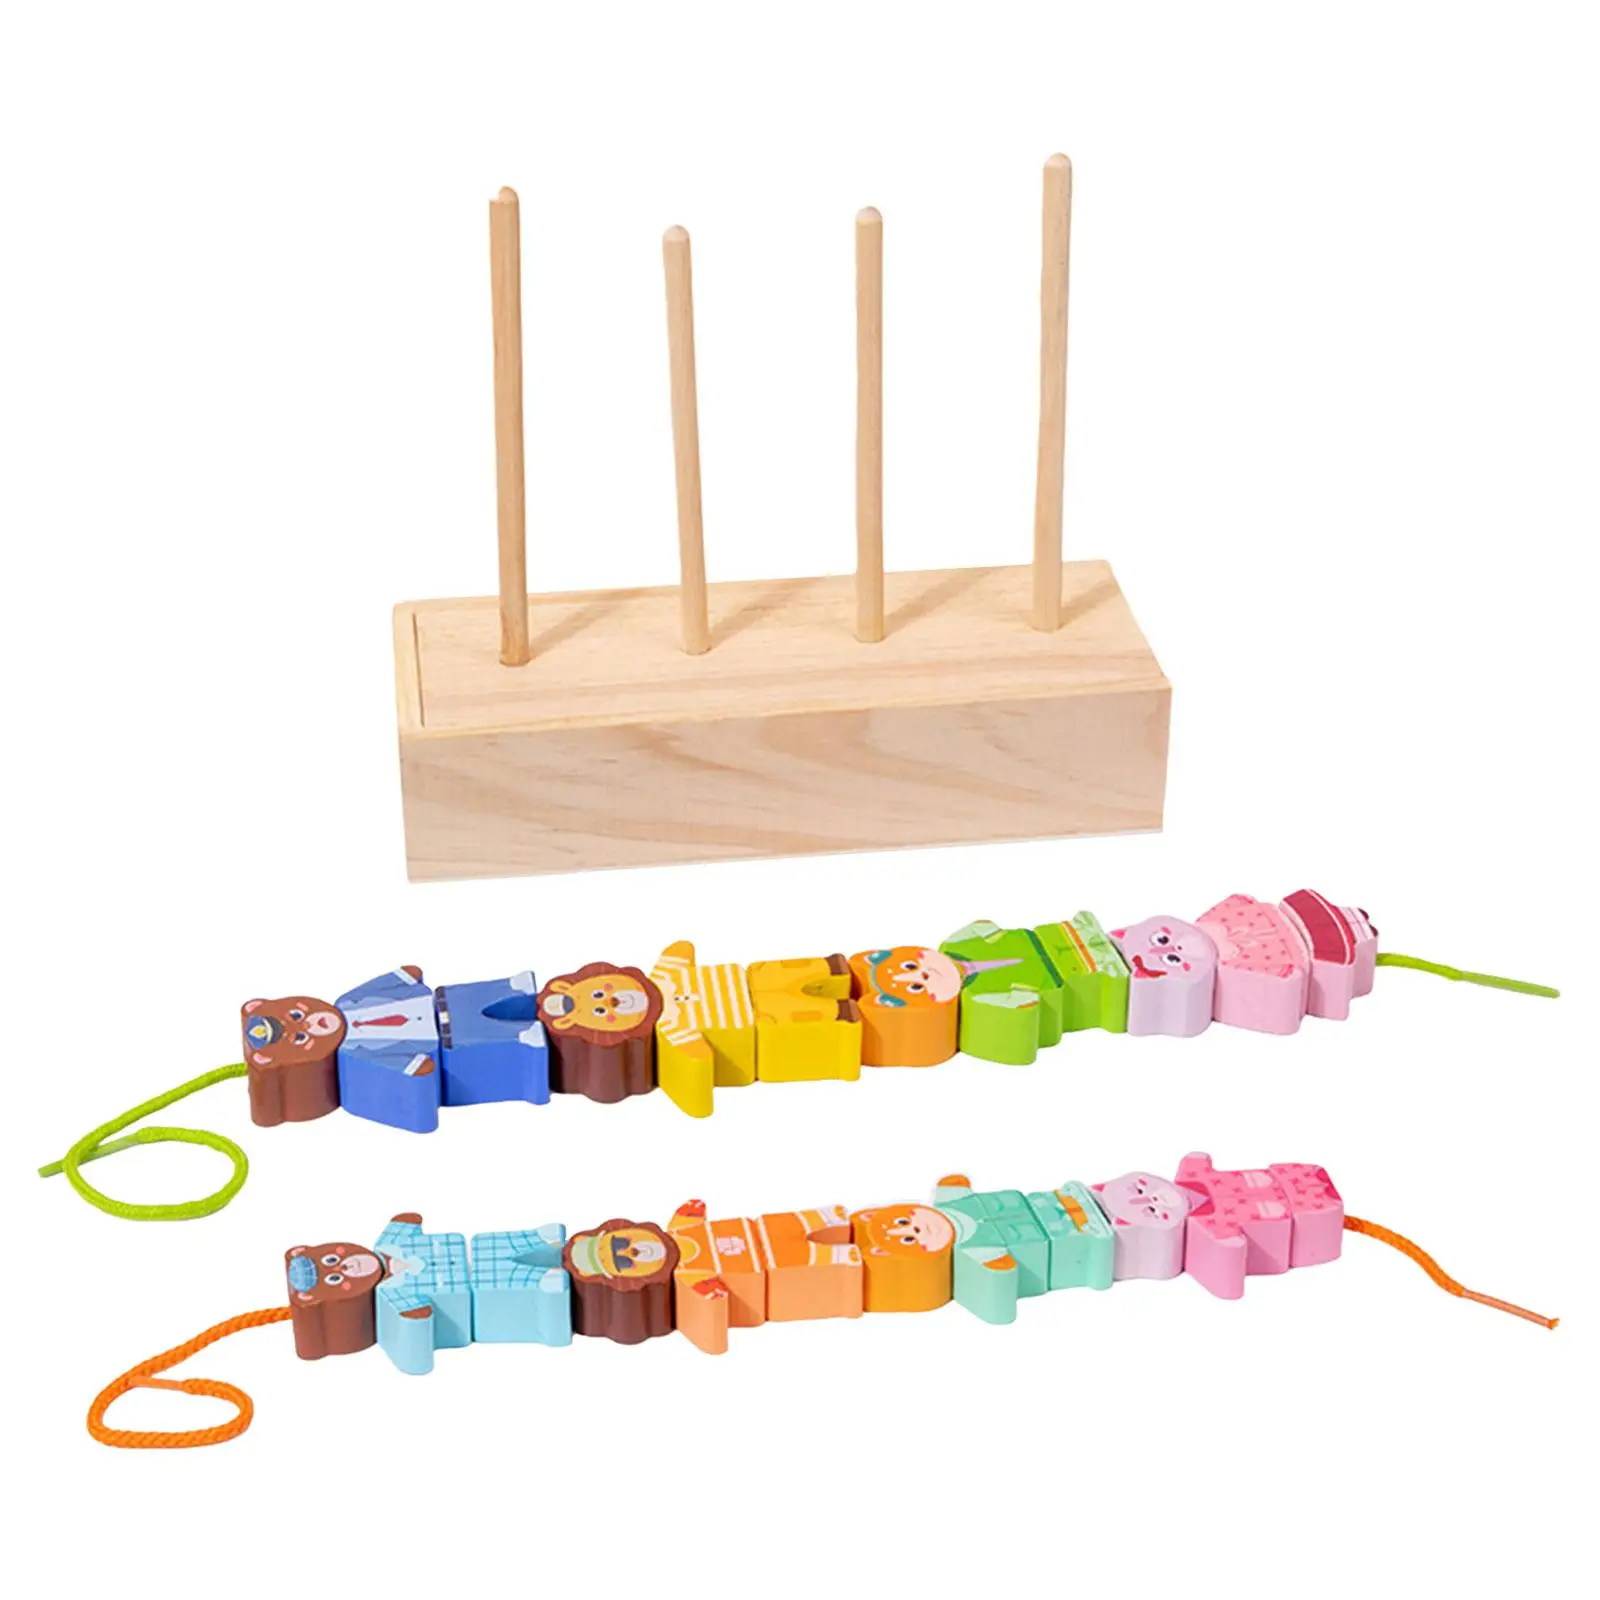 Animal Stringing Threading Wooden Beads Toy Early Learning Toys Educational Toy for Kids Toddlers Boys 1 2 3 4 Years Old Gifts